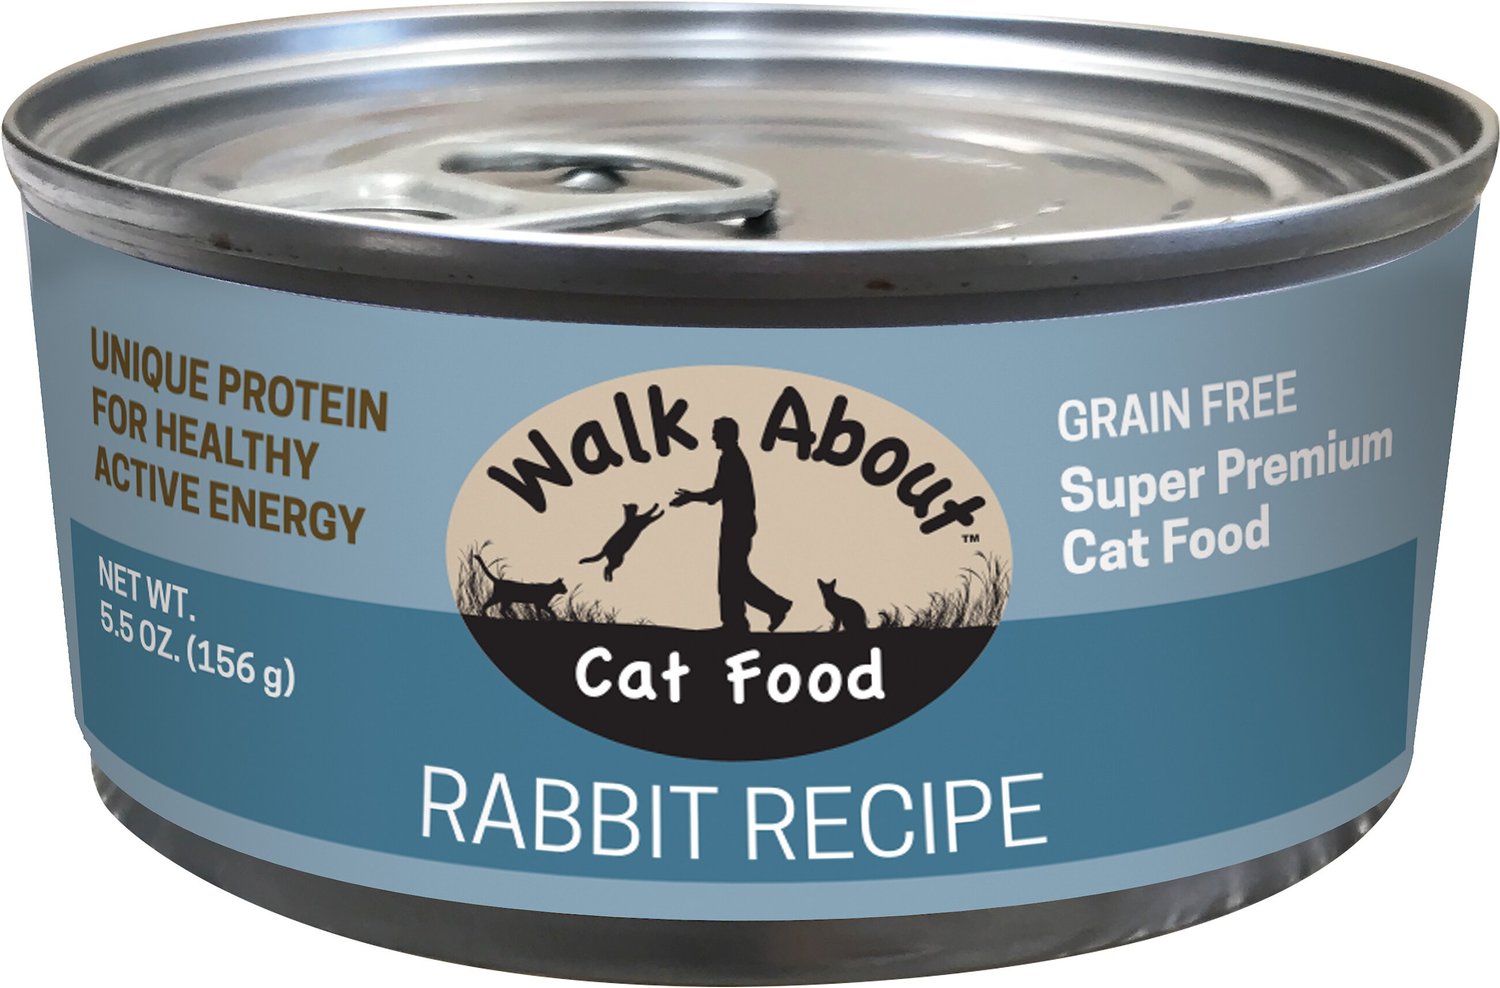 WALK ABOUT GrainFree Rabbit Canned Cat Food, 5.5 oz, case of 24